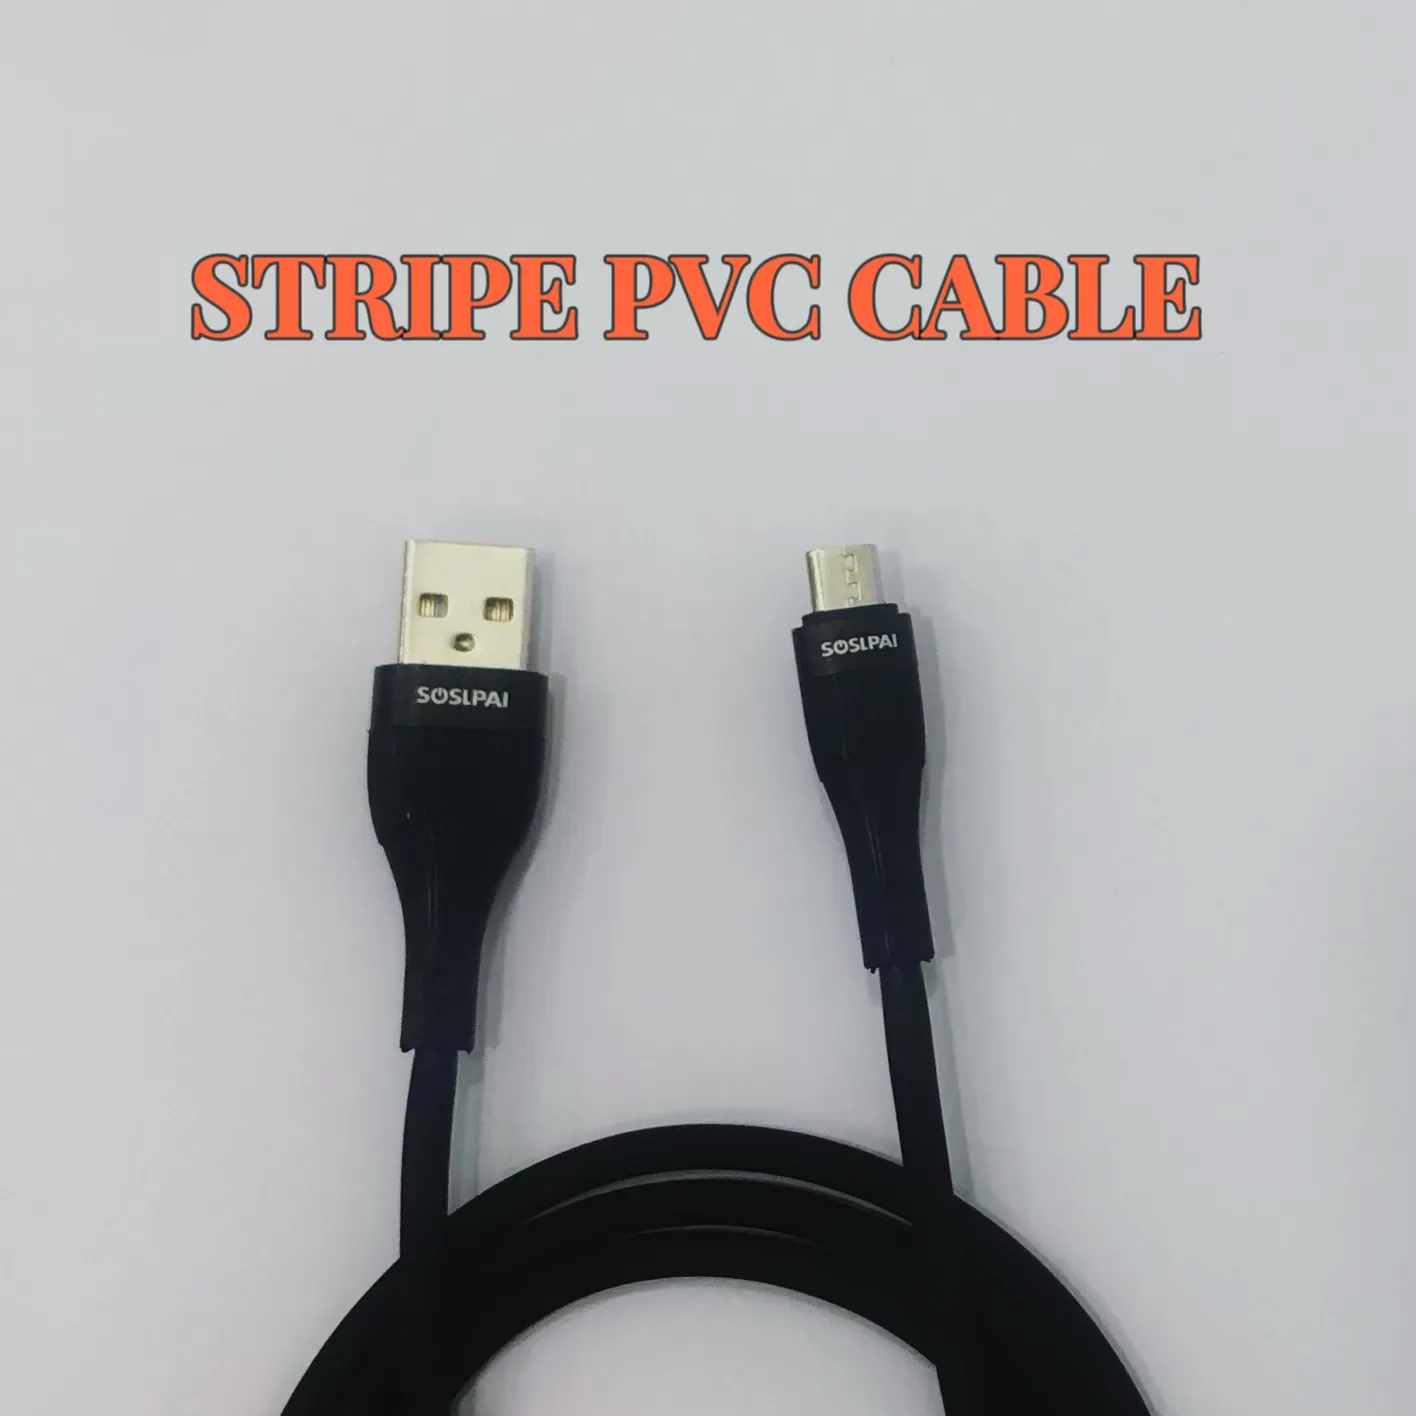 Original High Quality Phone Charger 1m USB Cable Data Transfer Fast Charging Type-C Cable For Mobile Phone